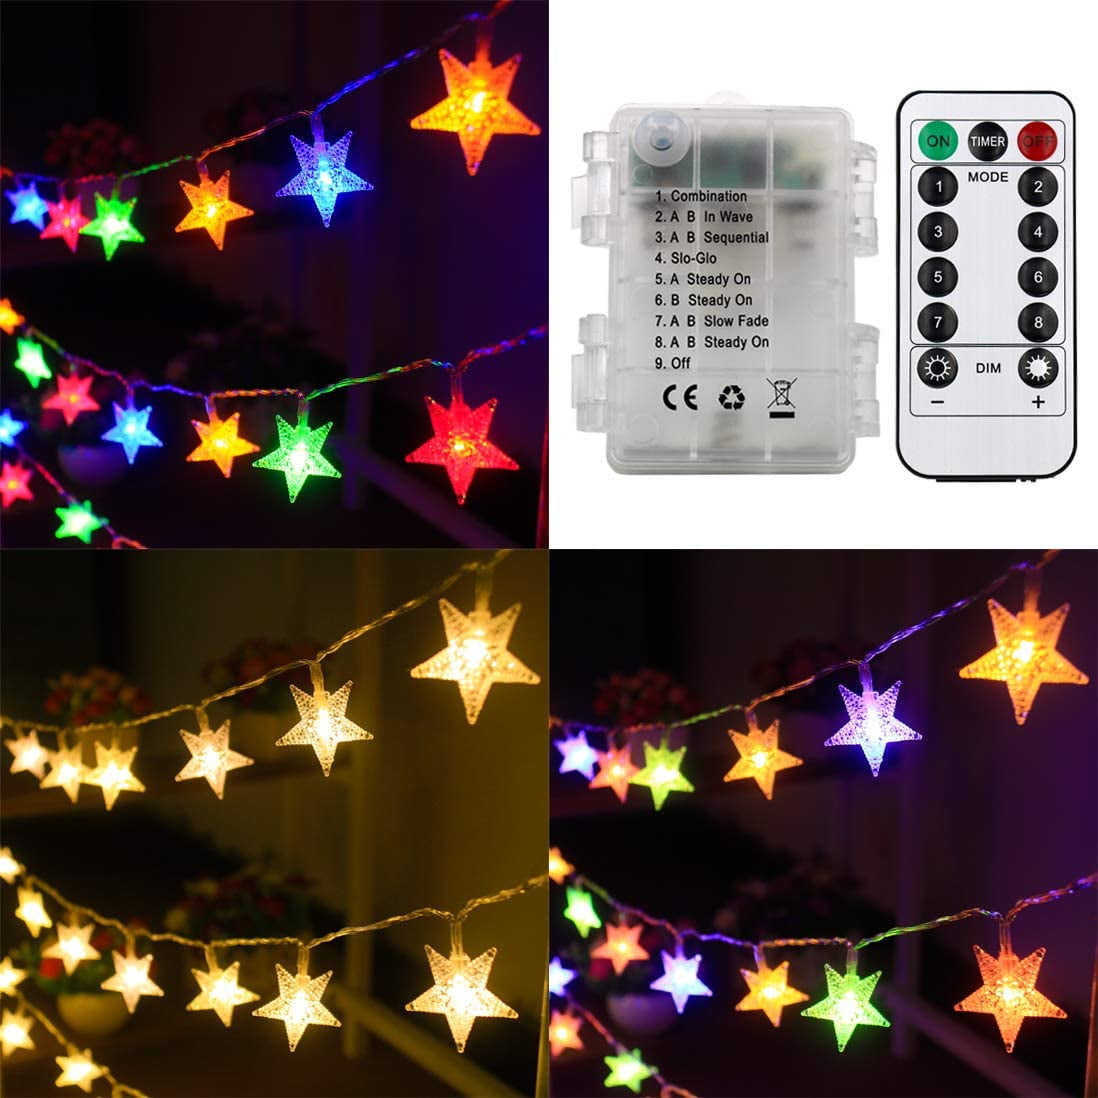 Exgreem Home Fairy Christmas Lights Star String Lights Battery Operated 8  Modes with Remote Control